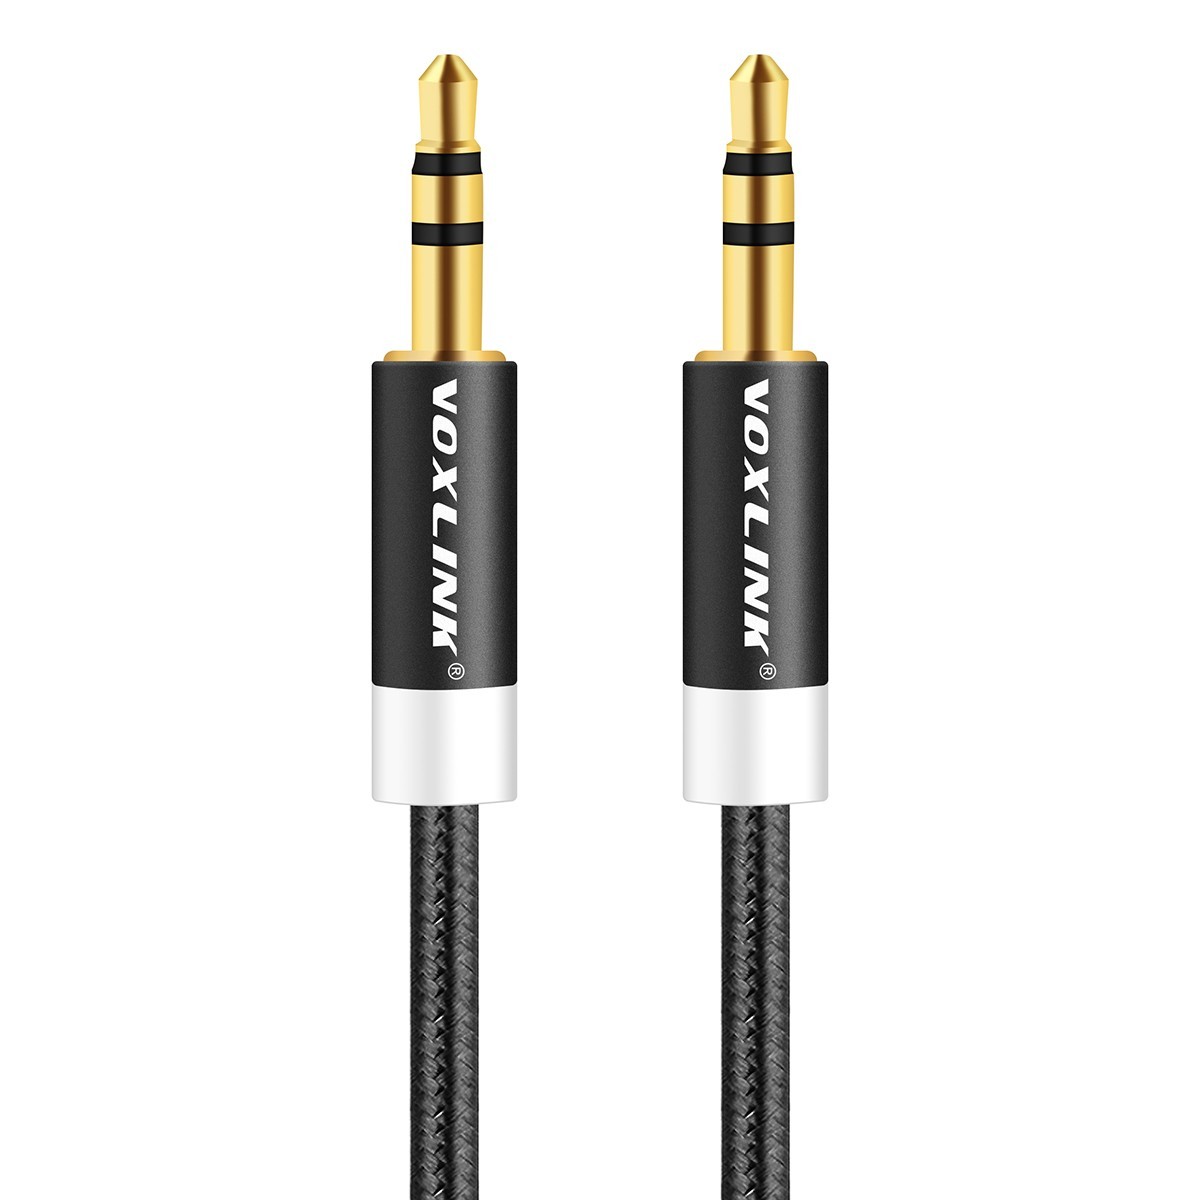 VOXLINK 3ft/1m 3.5 mm Jack Audio Cable for iPhone 6 6s 3.5mm AUX Auxiliary Cord Male to Male Stereo Audio Cable For CAR MP3/MP4 black 1m